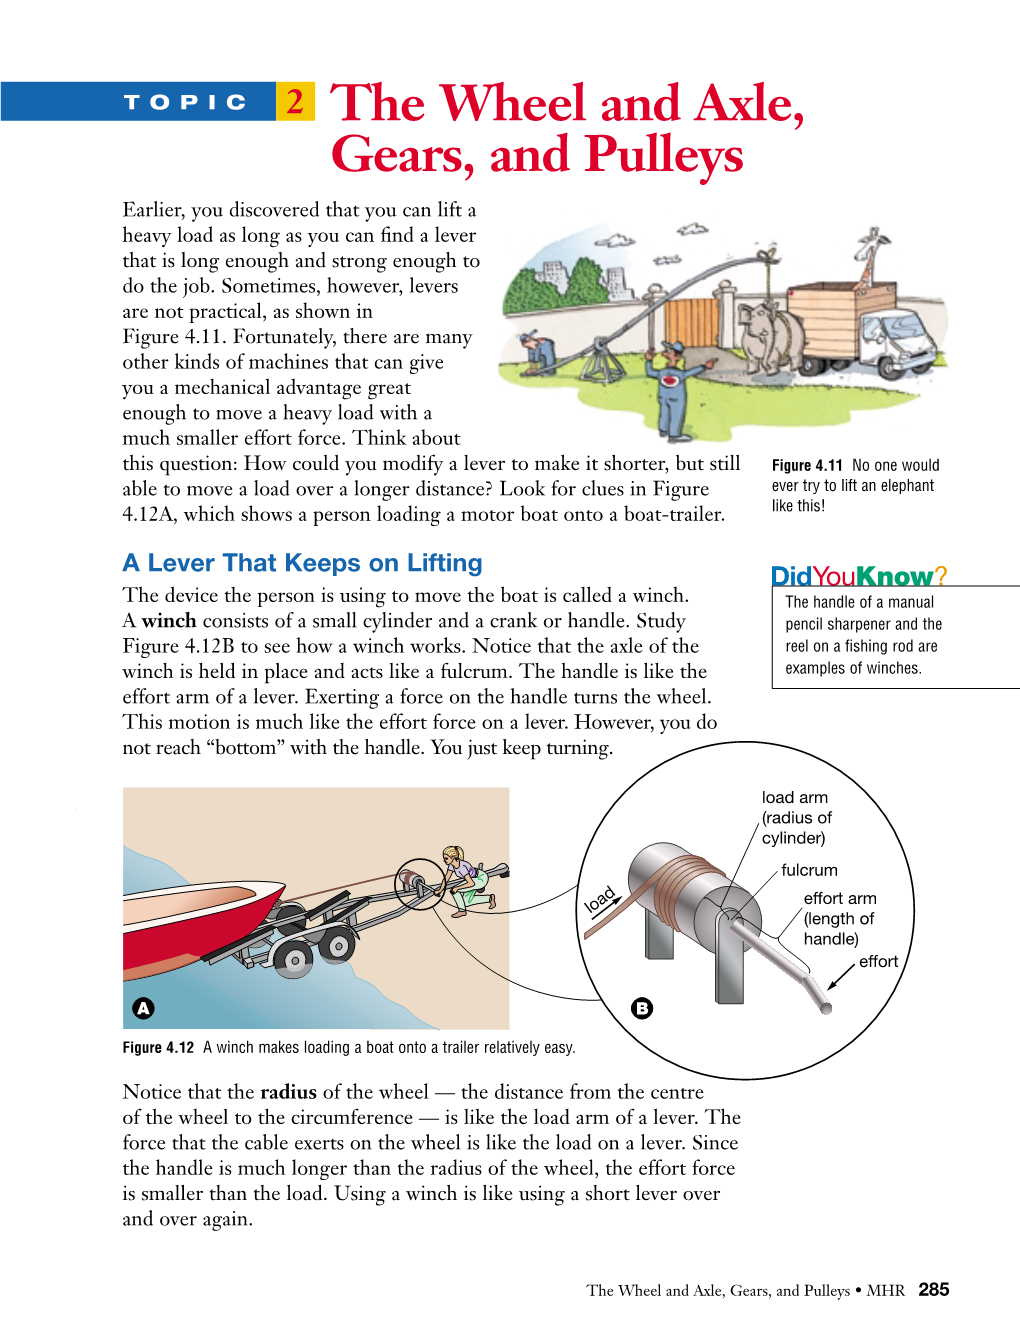 The Wheel and Axle, Gears, and Pulleys